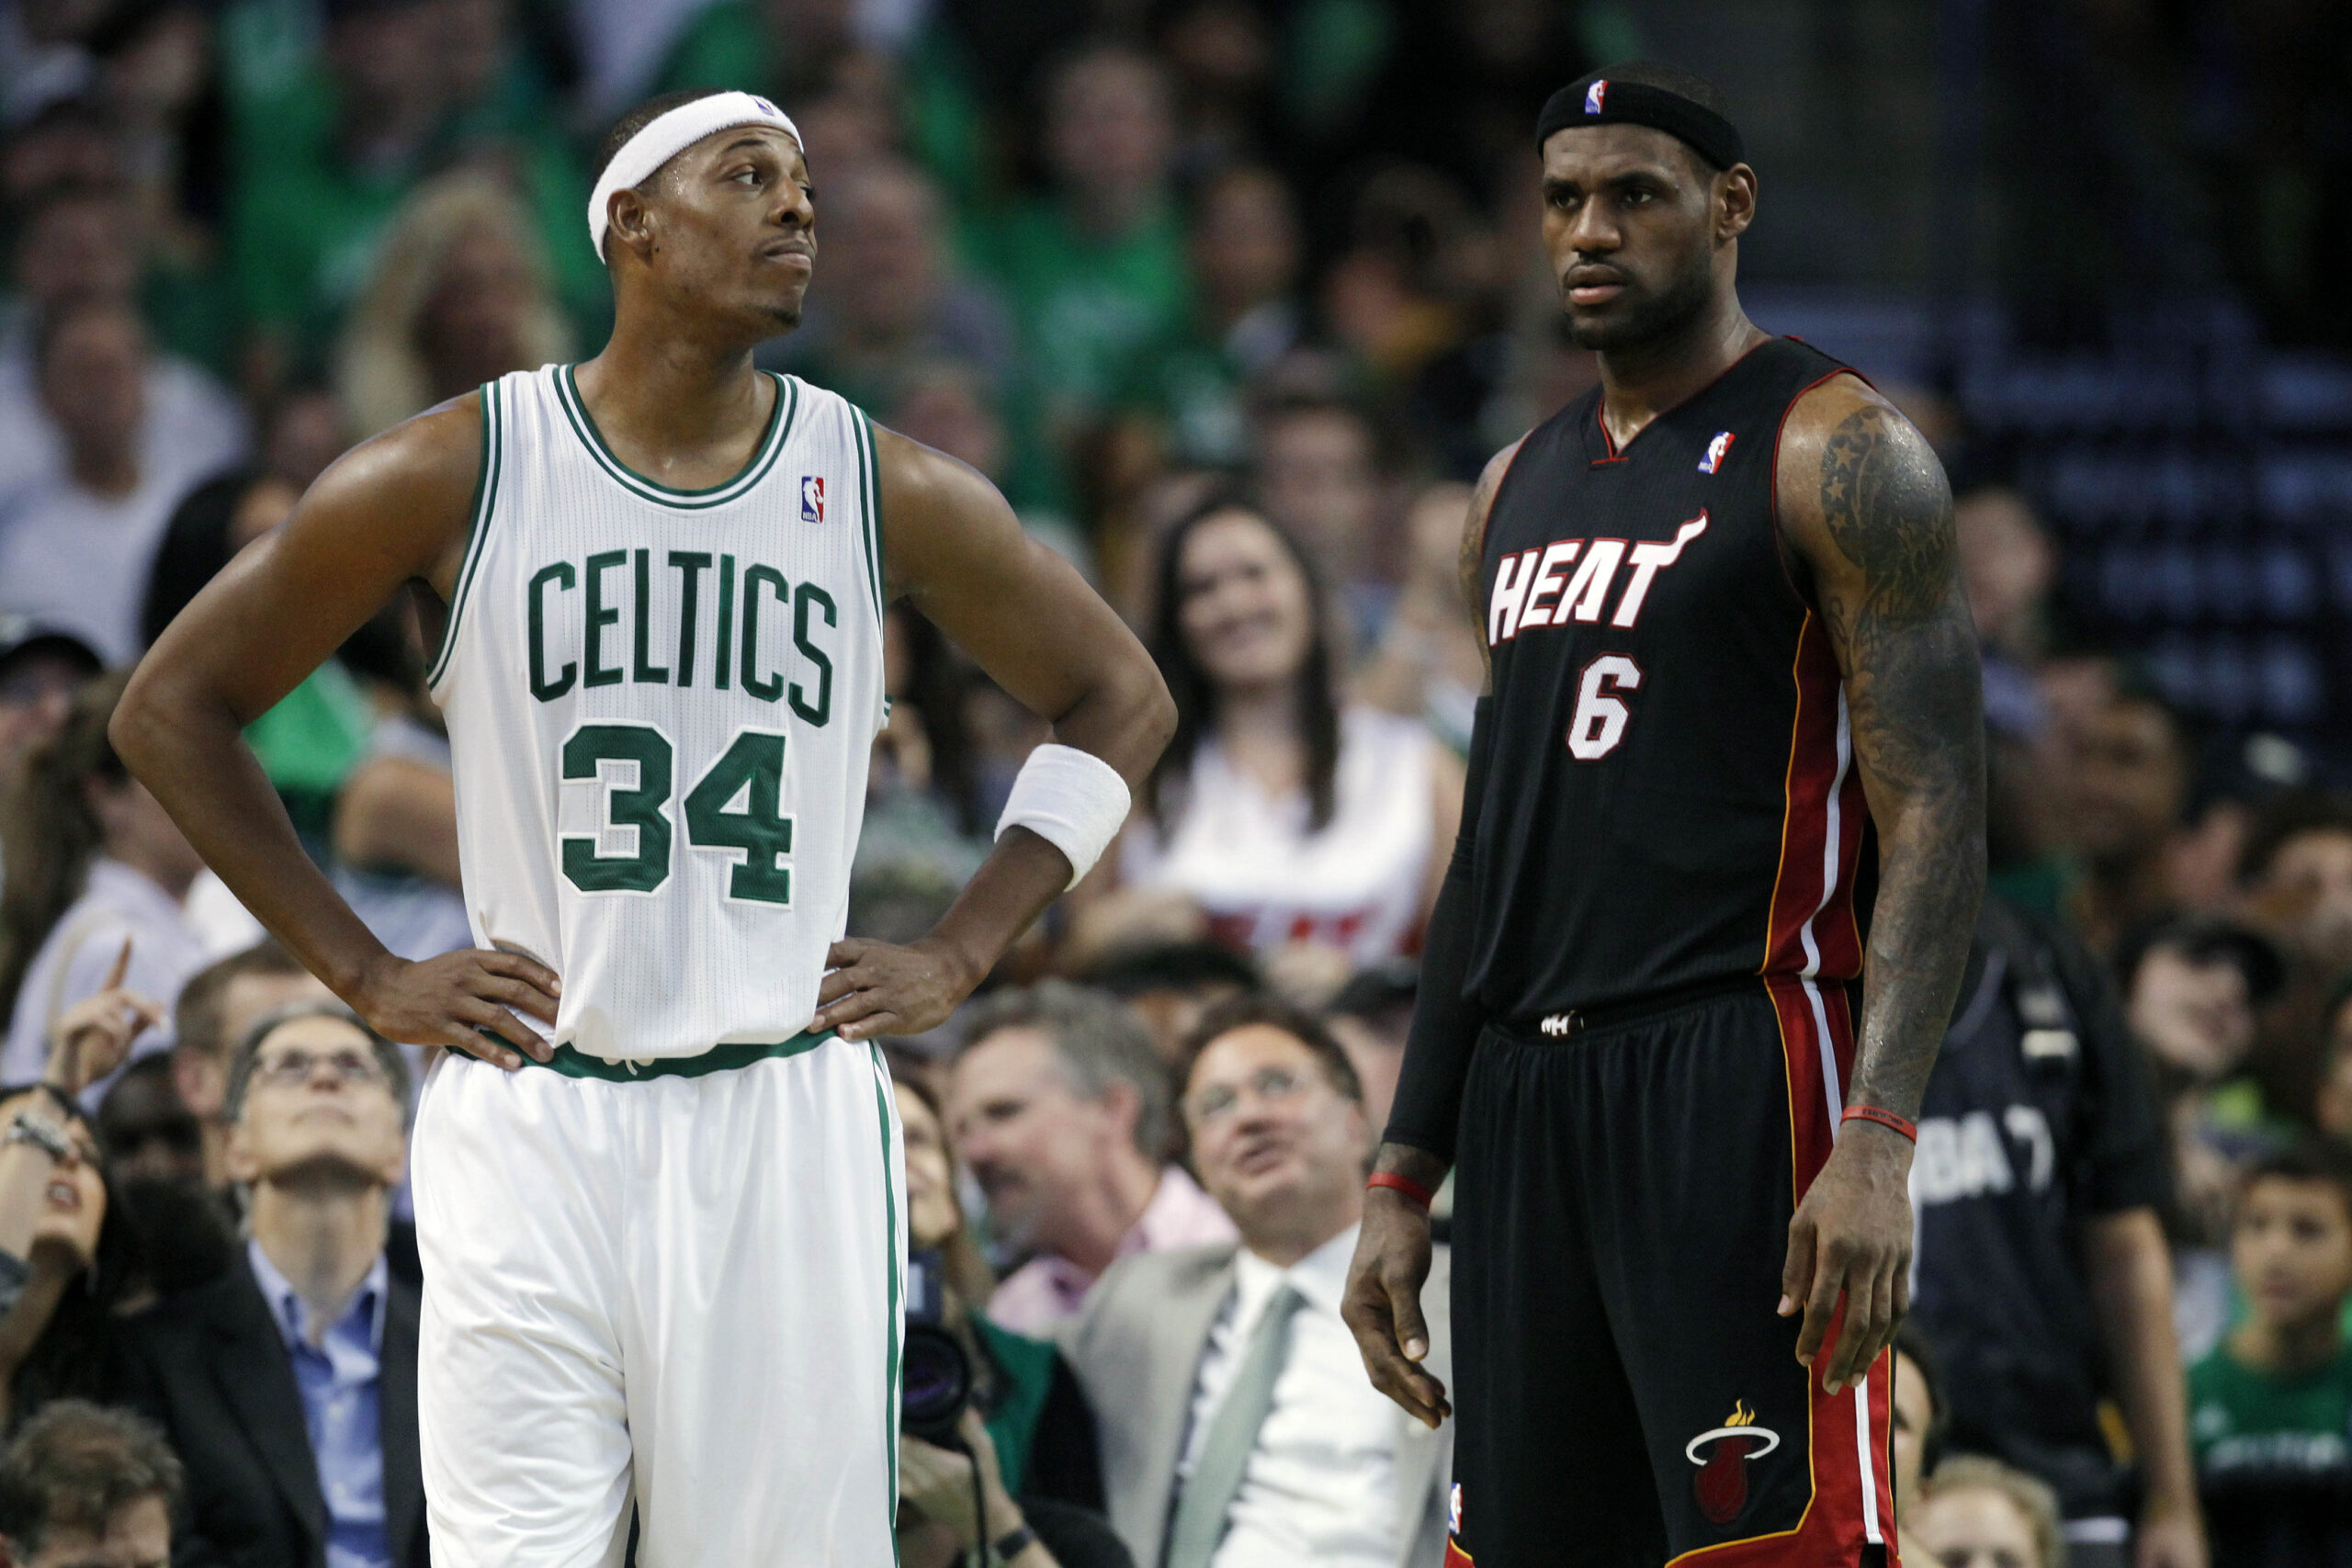 Oct 26, 2010; Boston, MA, USA; Boston Celtics forward Paul Pierce (34) on the court during a break in the first half with Miami Heat forward LeBron James (6) at the TD Garden. Mandatory Credit: David Butler II-USA TODAY Sports